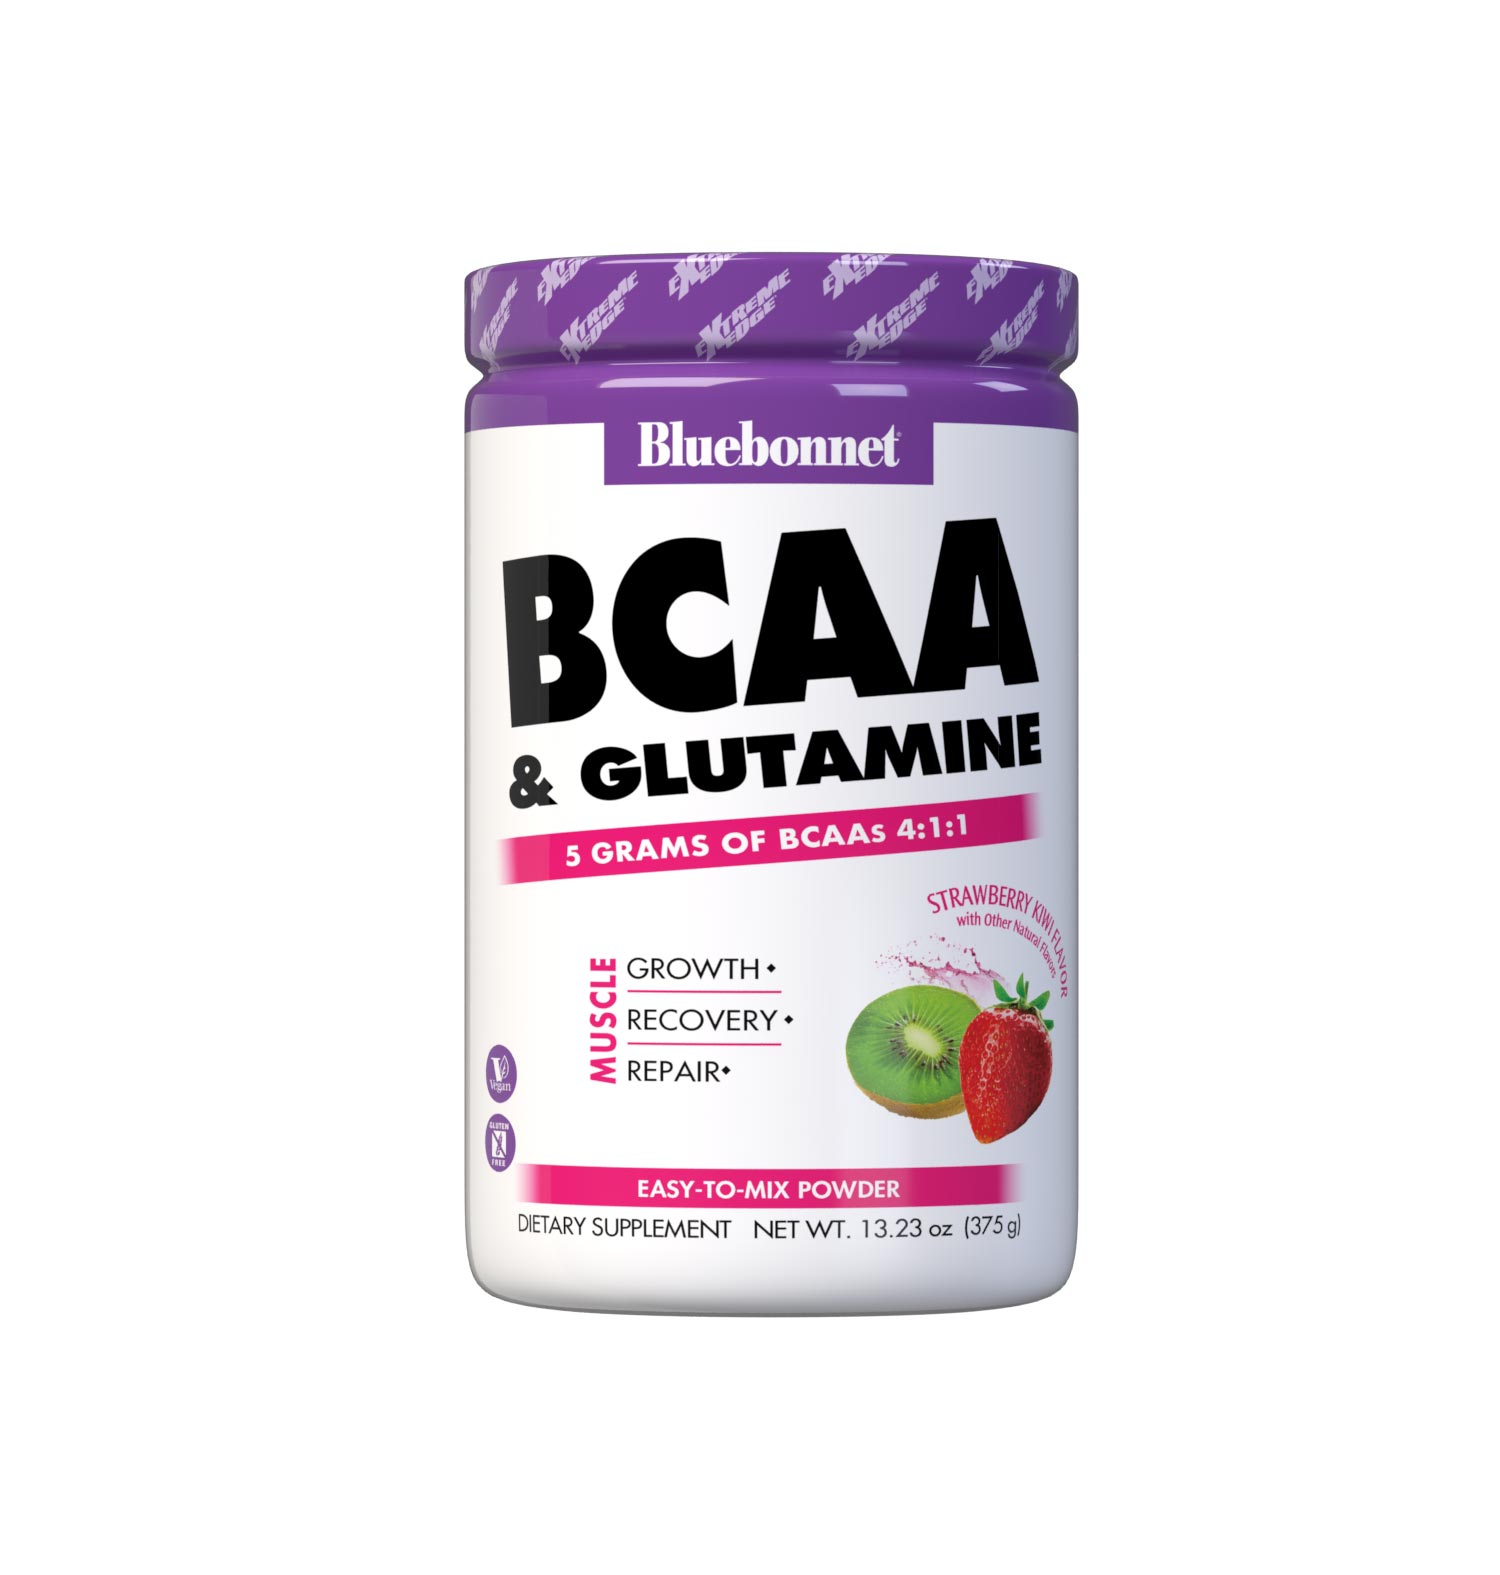 BCAA and Glutamine Strawberry Kiwi Flavor features the scientifically substantiated 4:1:1 ratio (leucine: isoleucine: valine) of fermented branched chain amino acids plus 1000 mg of free-form L-glutamine, which works in conjunction with L-leucine to improve muscle growth and repair. Fermented BCAA uses only vegetable-based sources, making it a cleaner, superior product. BCAA, leucine in particular, helps improve workout intensity and stimulates protein synthesis for increased muscle mass. #size_13.23 oz